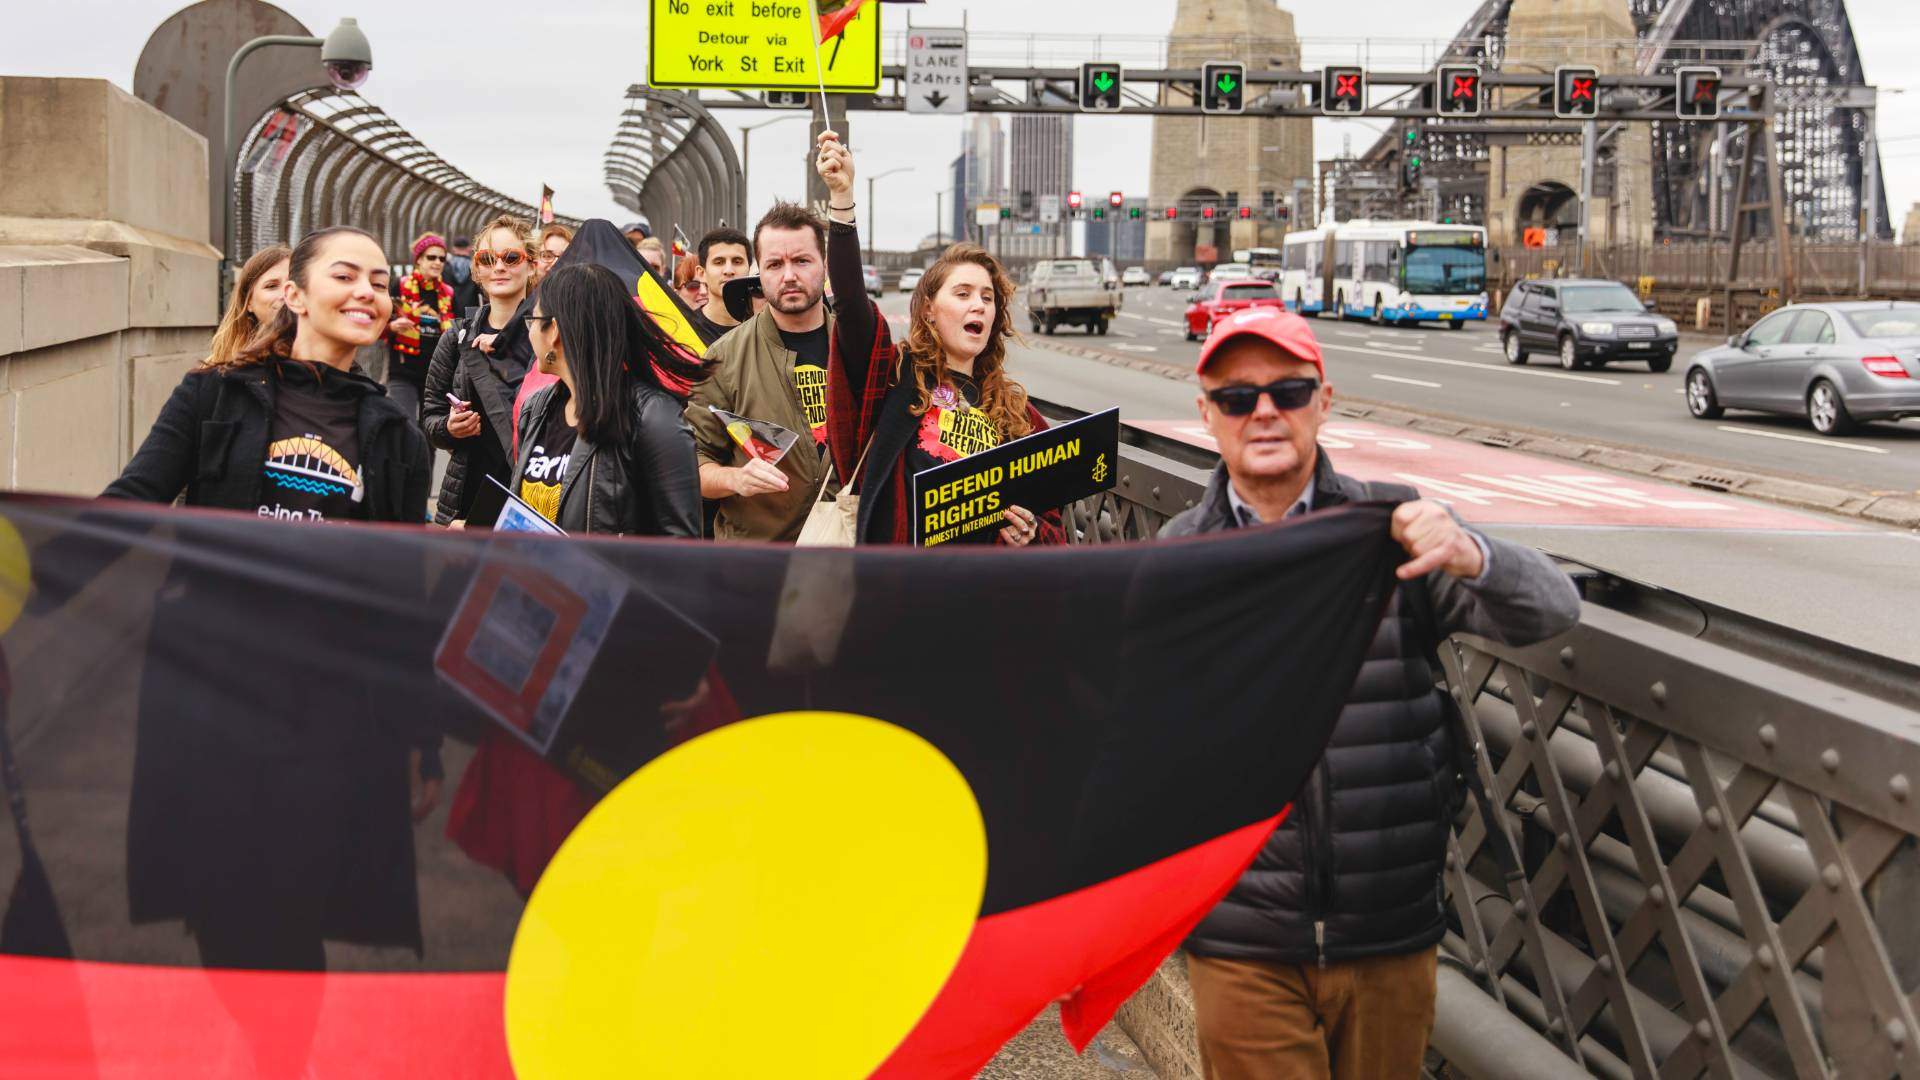 A Crowdfunding Campaign to Fly the Aboriginal Flag on the Harbour Bridge Has Raised $30,000